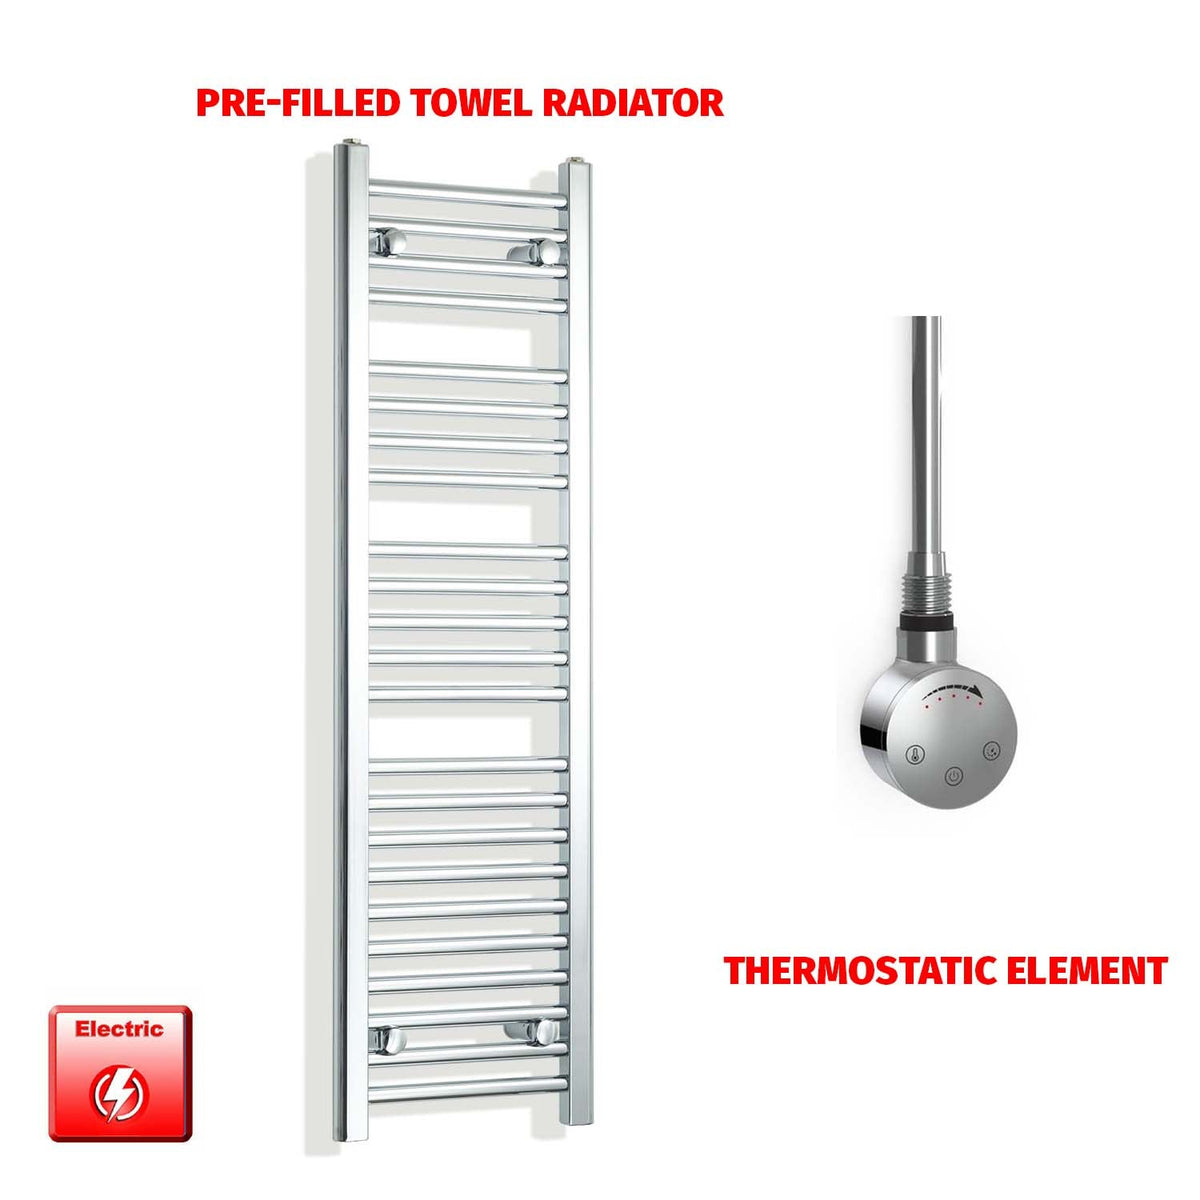 1200 x 350 Pre-Filled Electric Heated Towel Radiator Straight Chrome SMR Thermostatic element no timer